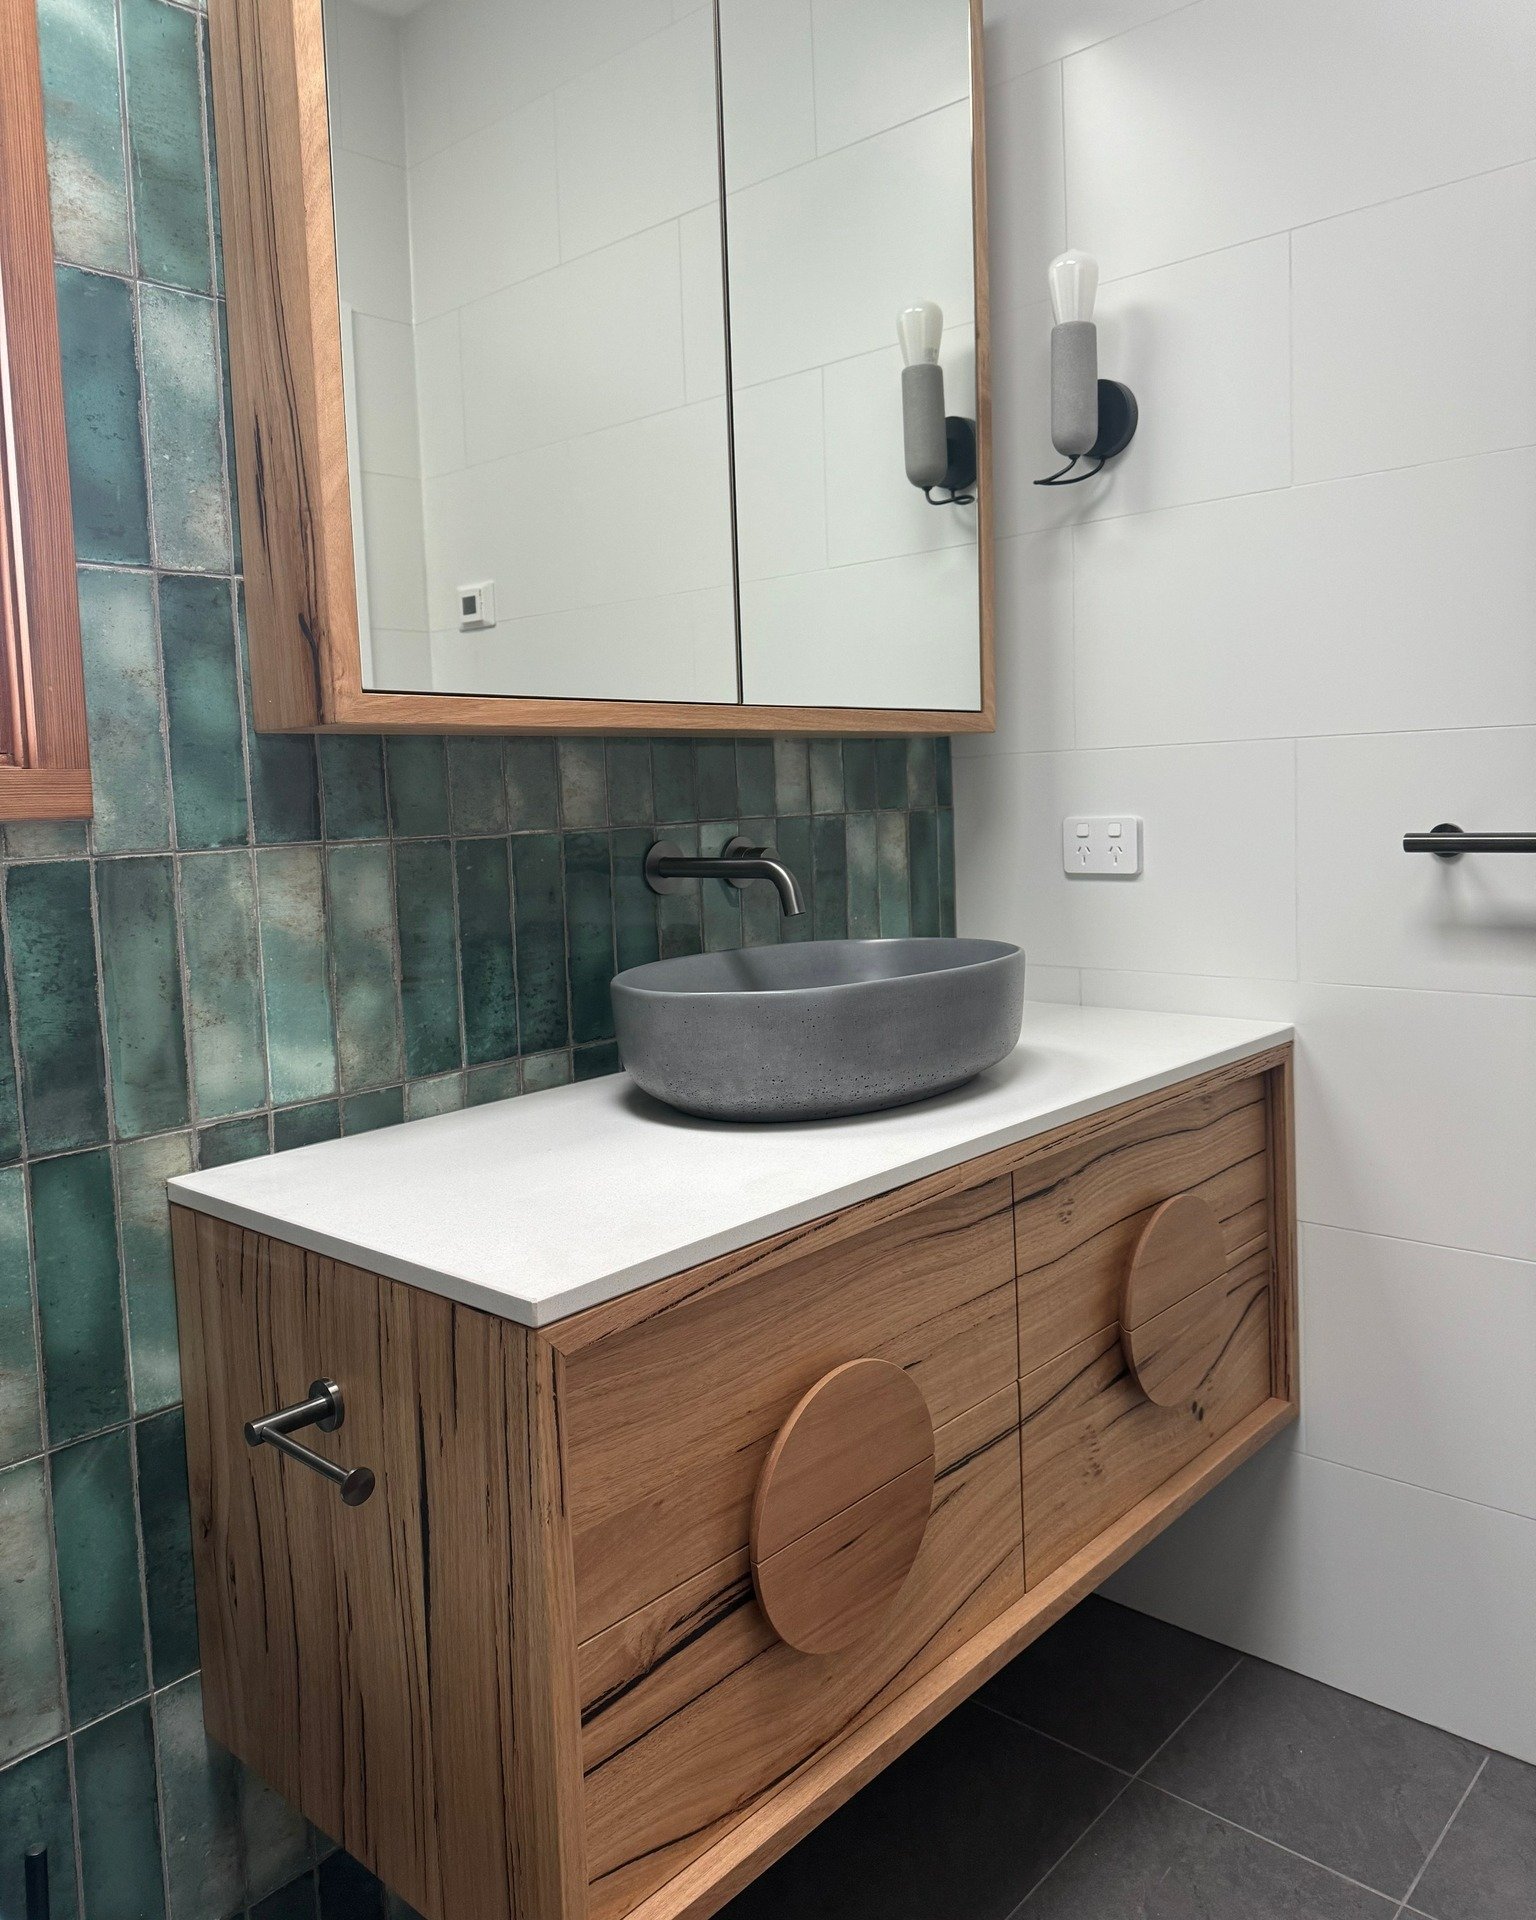 Thanks to our lovely clients for sending us a images of their beautiful finished bathroom renovation featuring our Burleigh vanity and Iluka shaving cabinet! Loving the pop of colour of the feature tiles! 

#ilukashavingcabinet #burleighvantiy #bathr